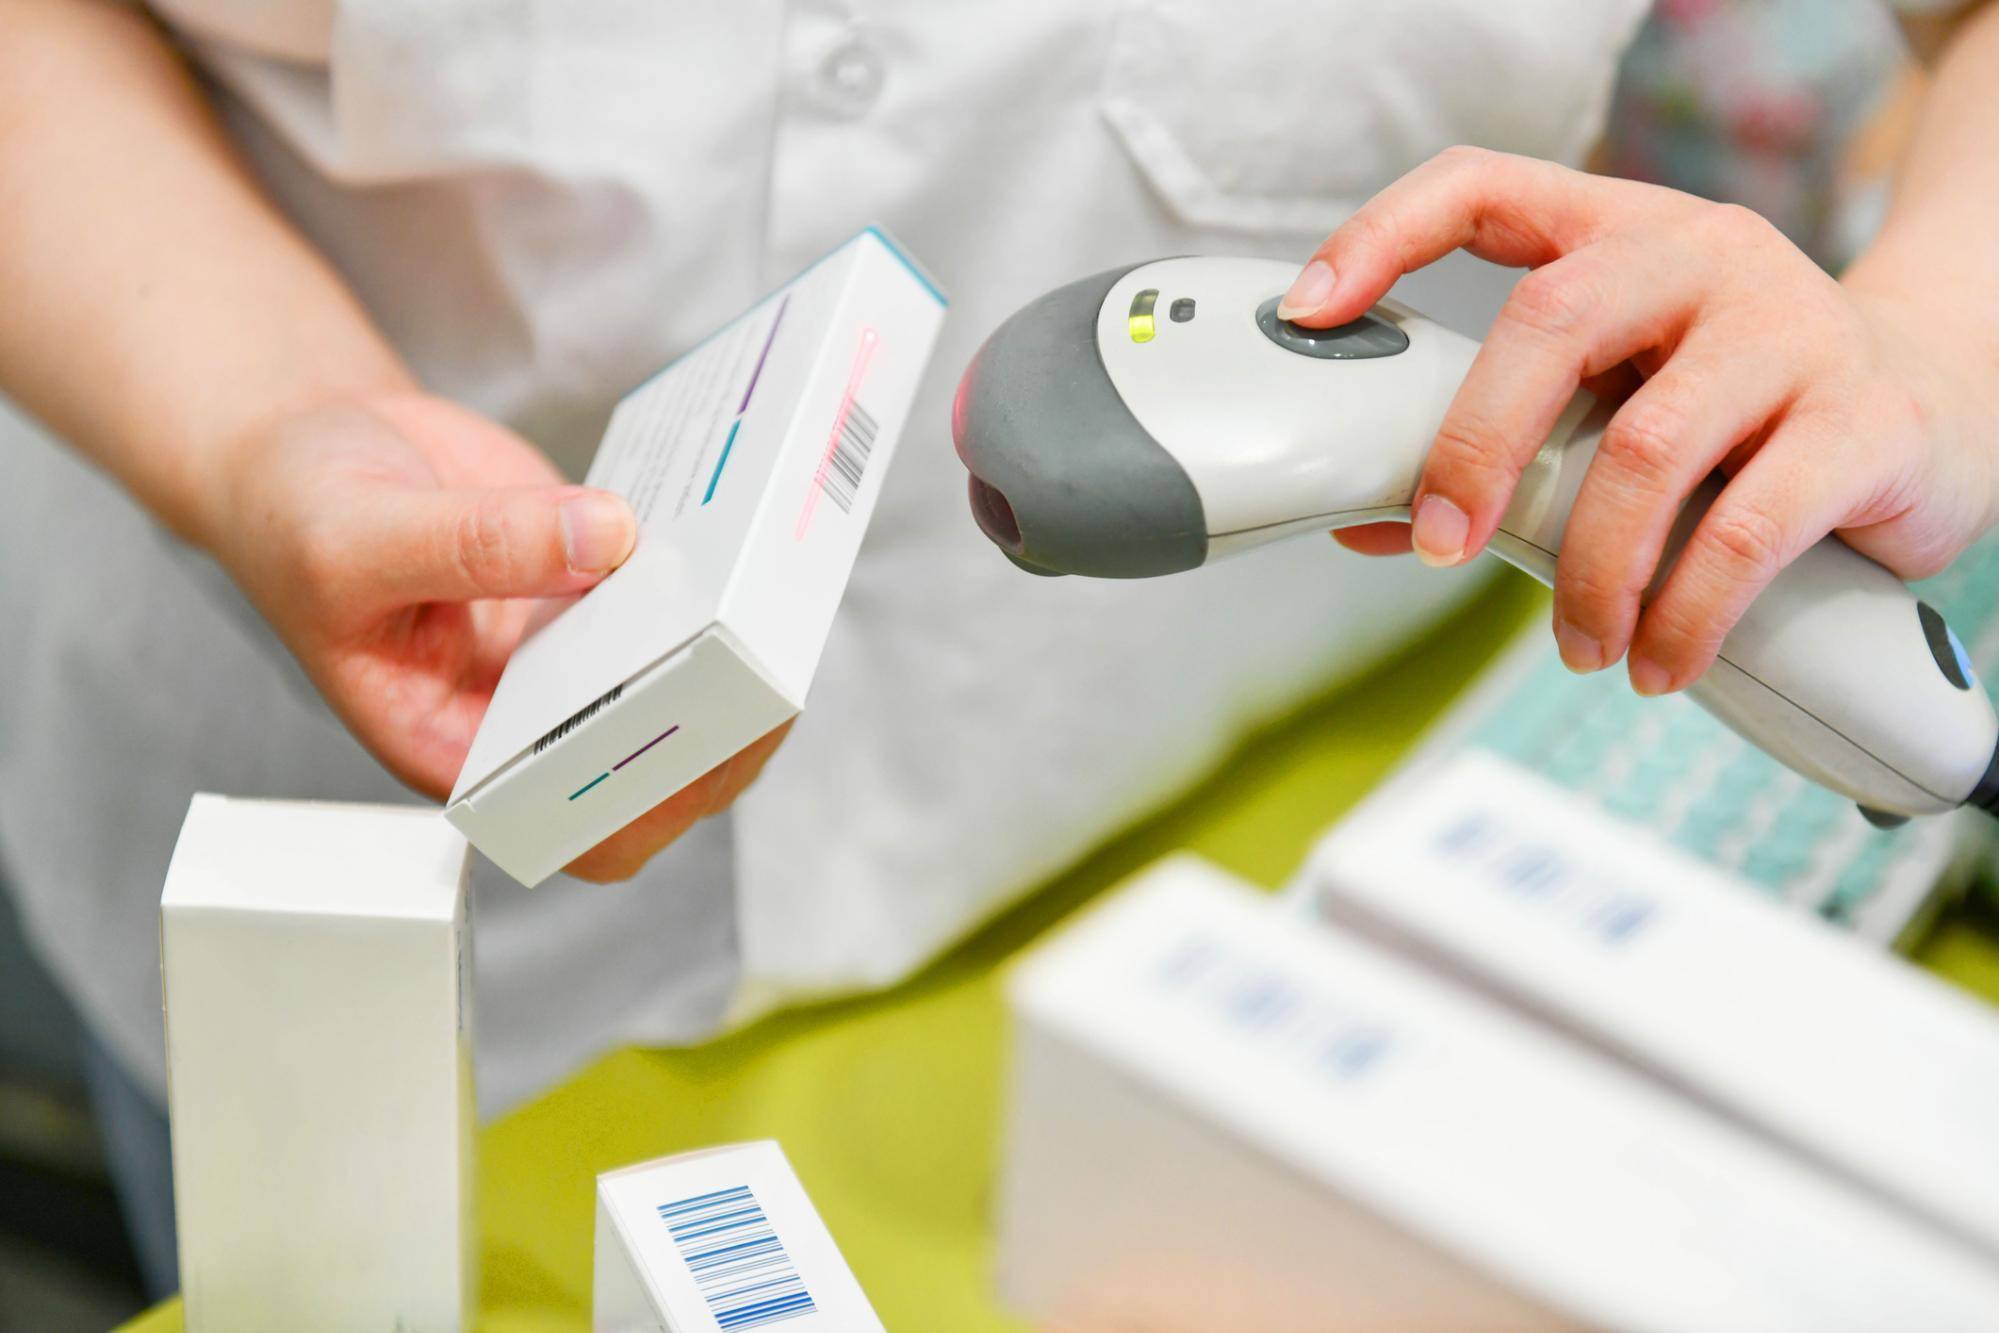 scanning inkjet printed barcode of a pharmaceutical product